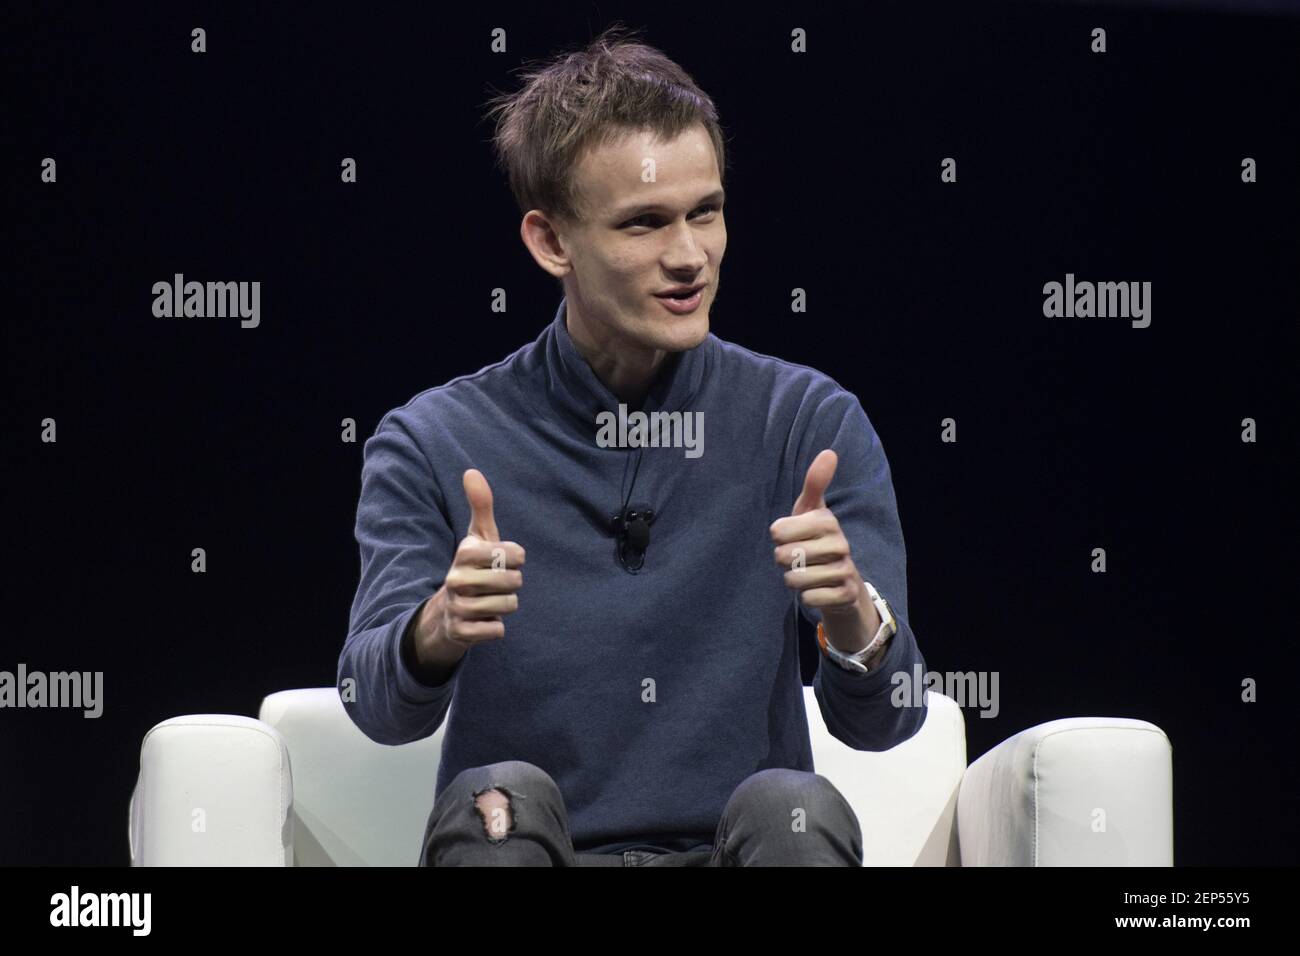 Vitalik Buterin, co-founder and inventor of Ethereum speaks during Samsung Developer Conference in San Jose, California on October 30, 2019. (Photo by Yichuan Cao/Sipa USA) Stock Photo